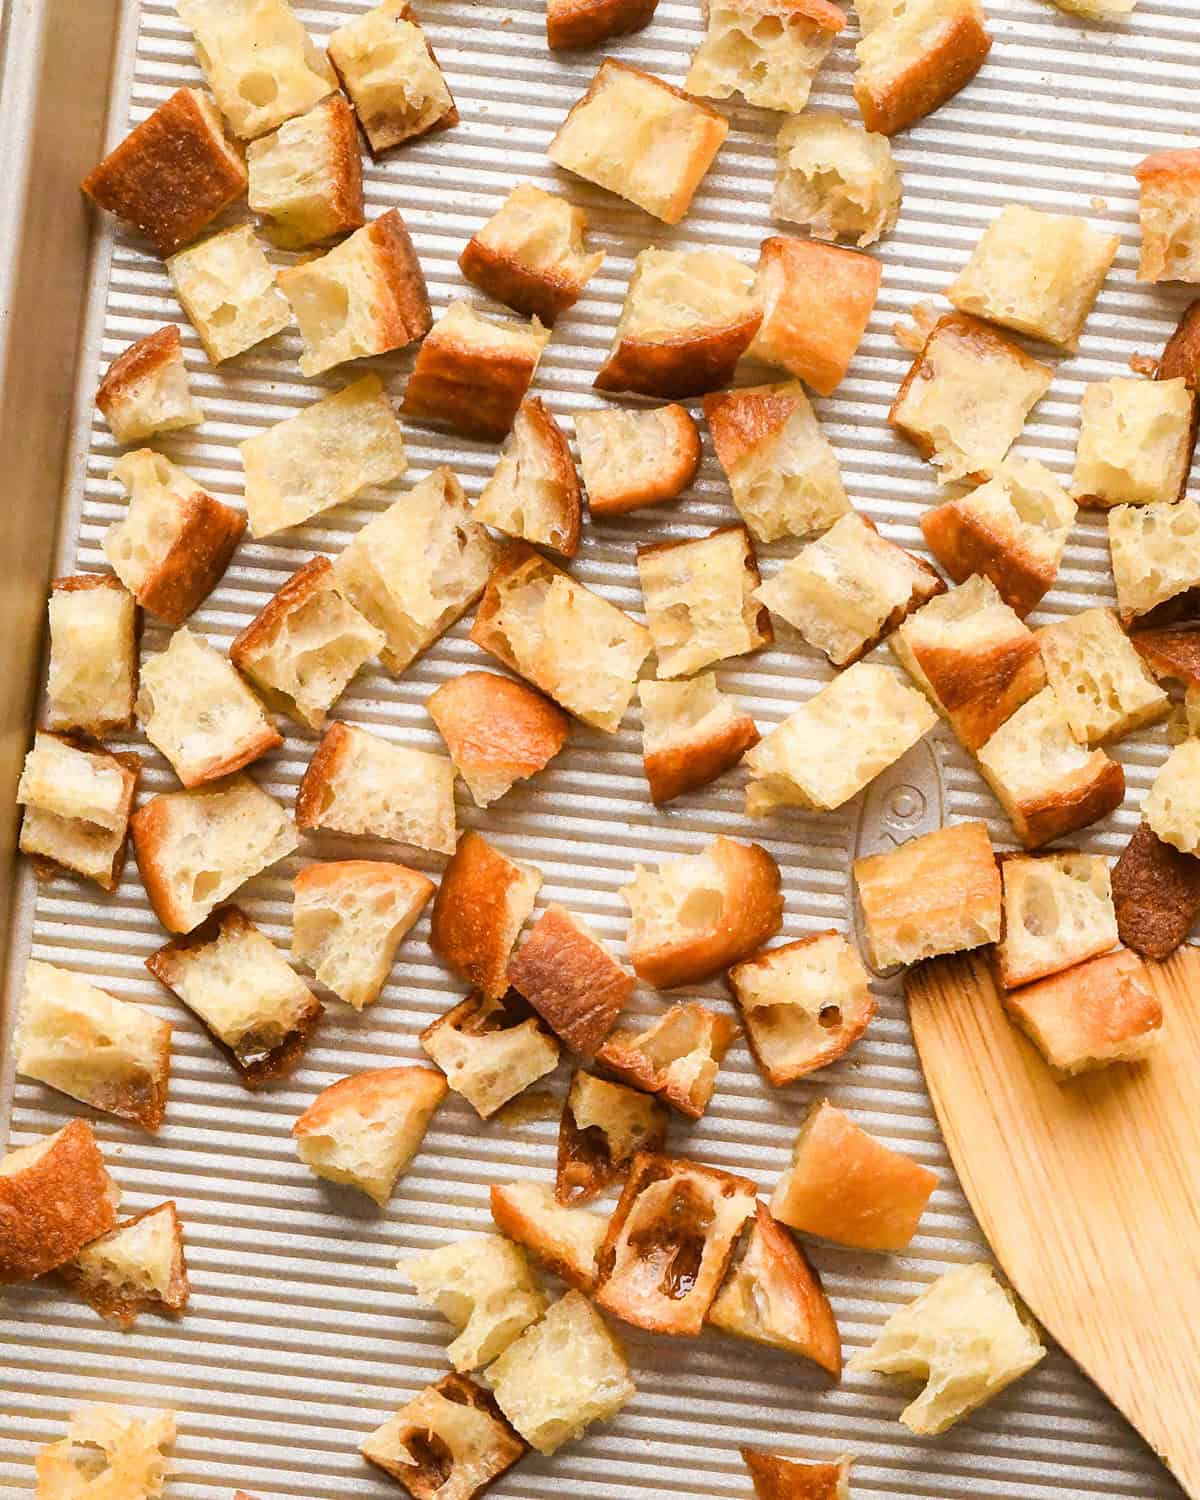 Homemade Croutons on a baking sheet with a wooden spatula